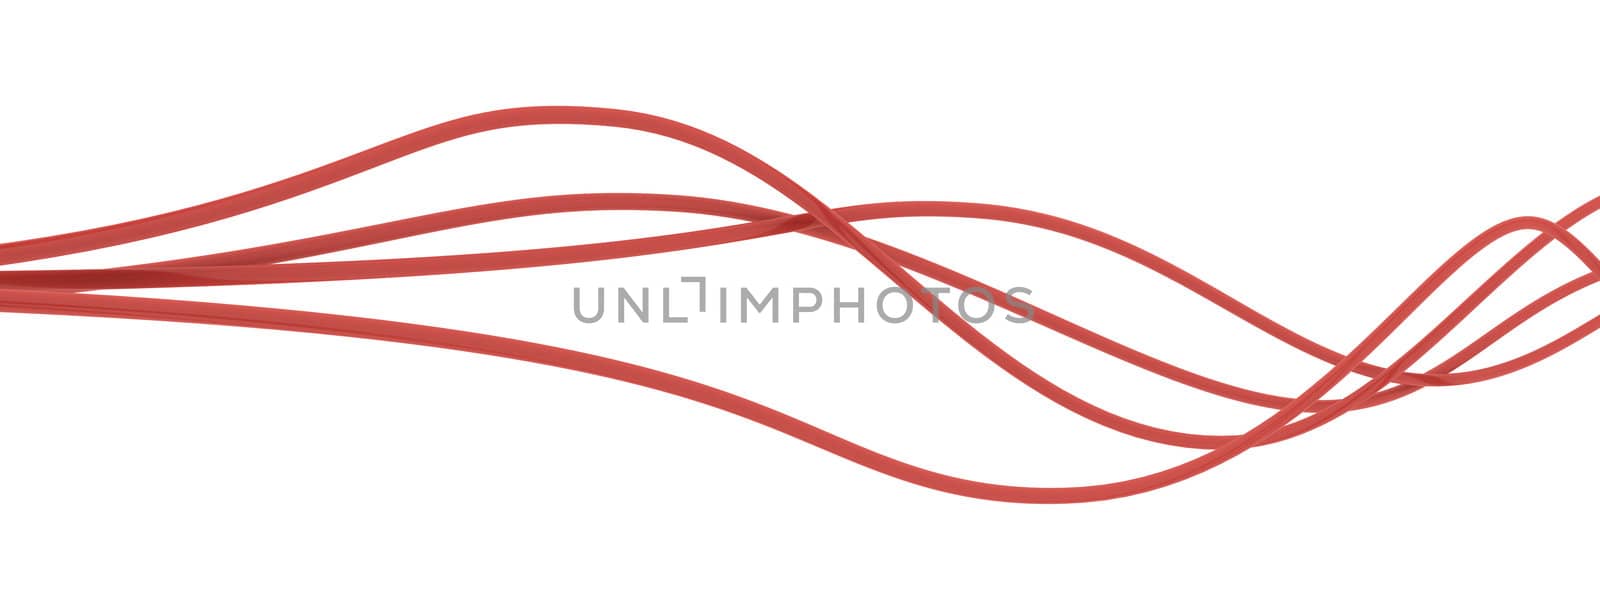 fibre-optical red cables on a white background